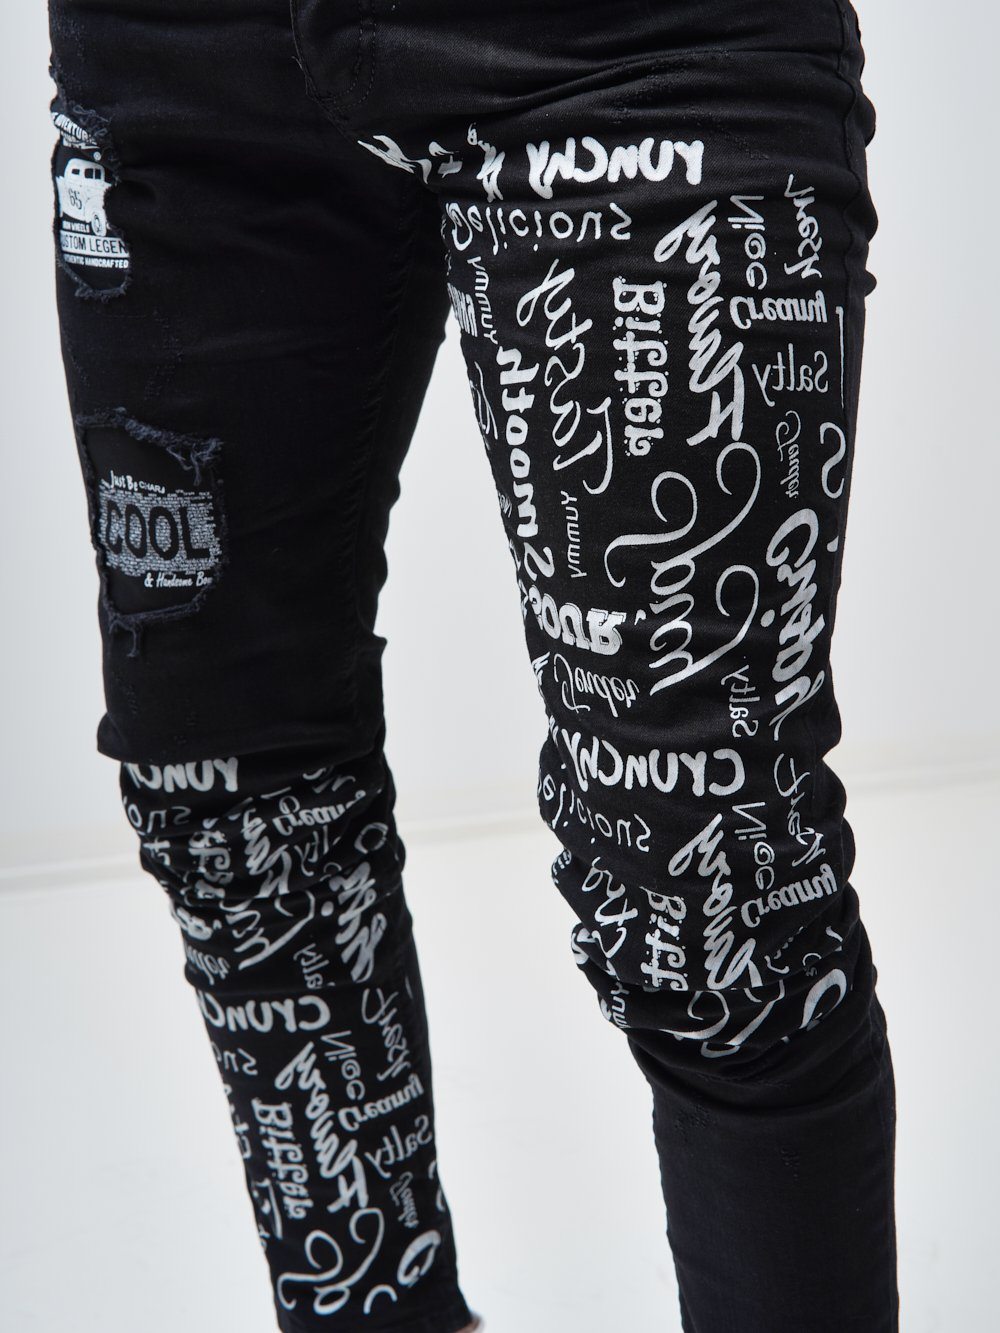 Close up shot of the printed text on the skinny fit streetwear jeans called THE MECHANIC by SERNES with lots of text printed on it